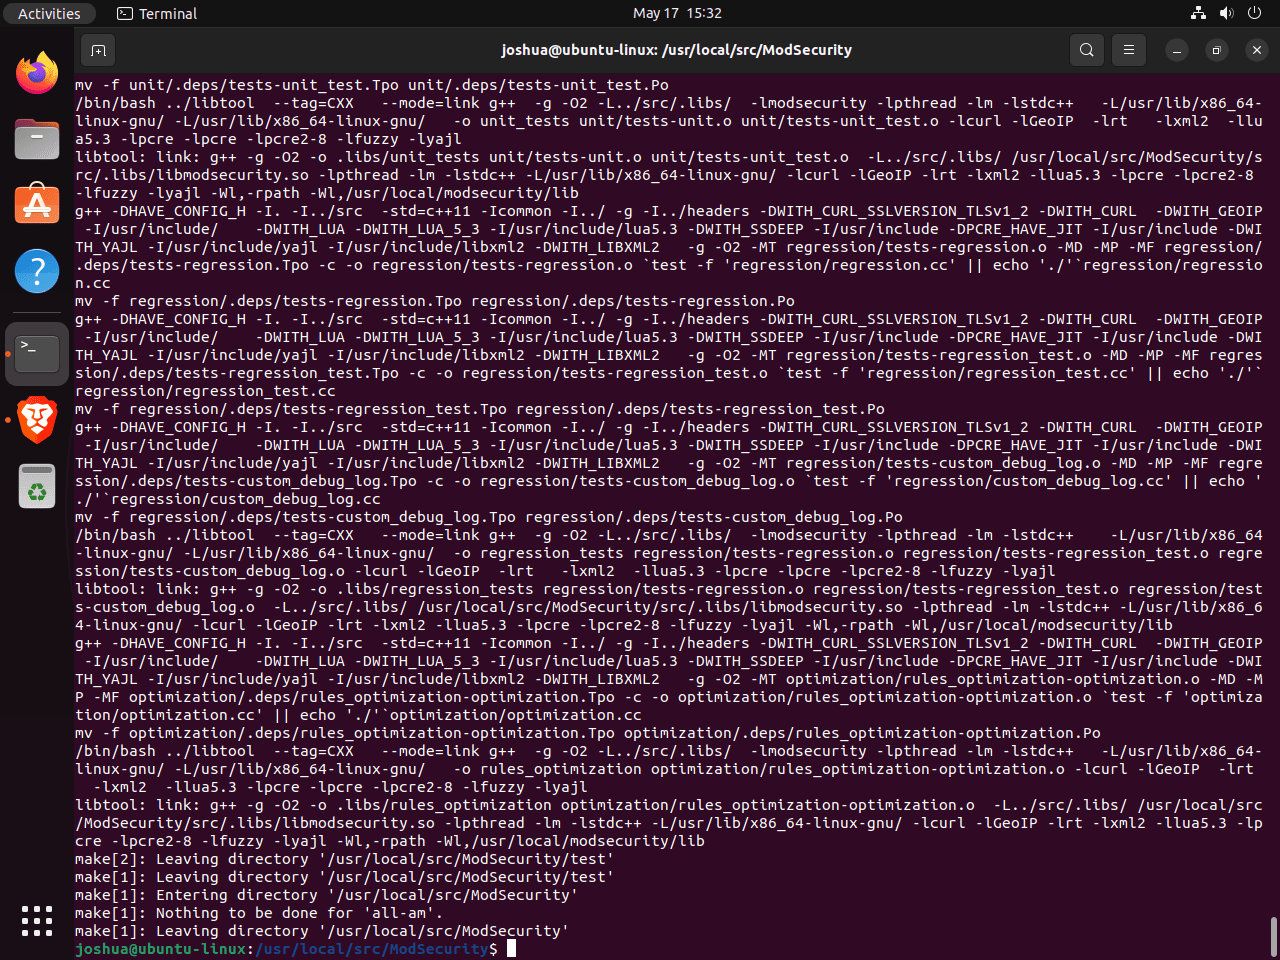 example of make terminal output for modsecurity 3 and nginx with ubuntu linux